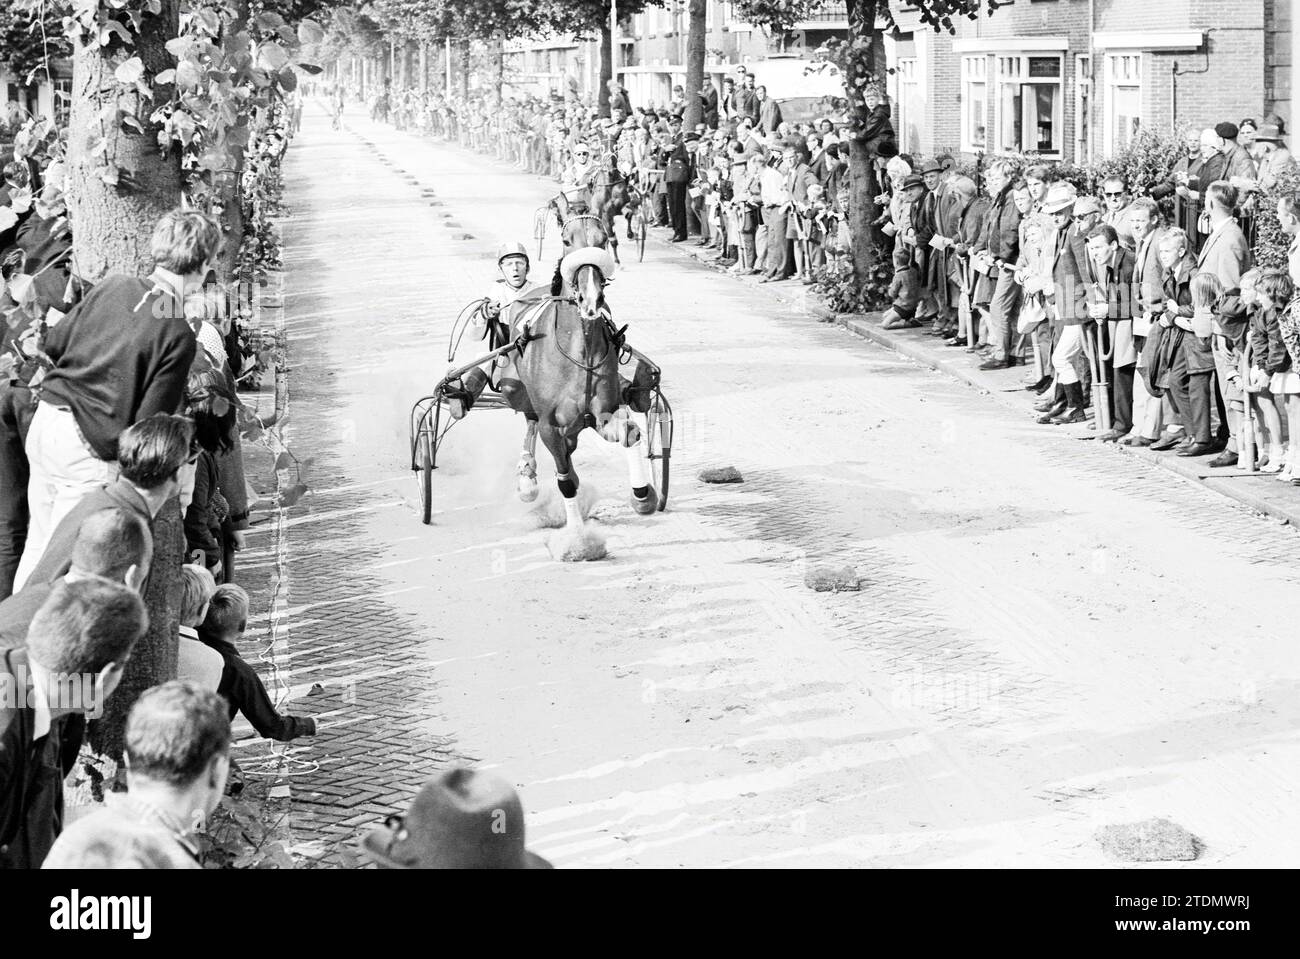 Harness racing, Whizgle News from the Past, Tailored for the Future. Explore historical narratives, Dutch The Netherlands agency image with a modern perspective, bridging the gap between yesterday's events and tomorrow's insights. A timeless journey shaping the stories that shape our future Stock Photo